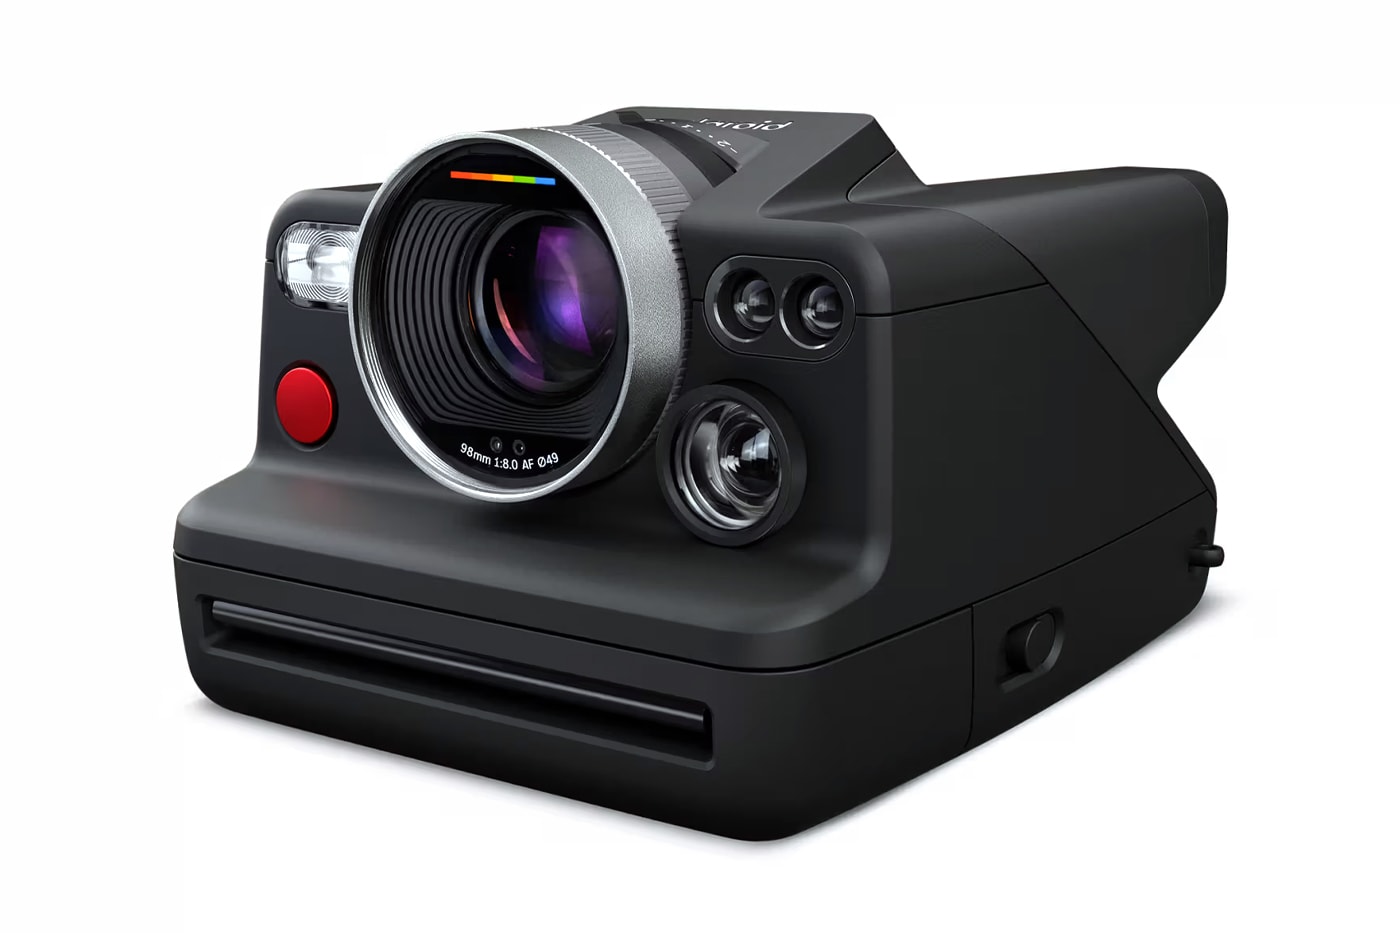 Polaroid Launches New I-2 Instant Camera for Instant Film with Autofocus and Manual Controls Rivals Fujifilm Instax